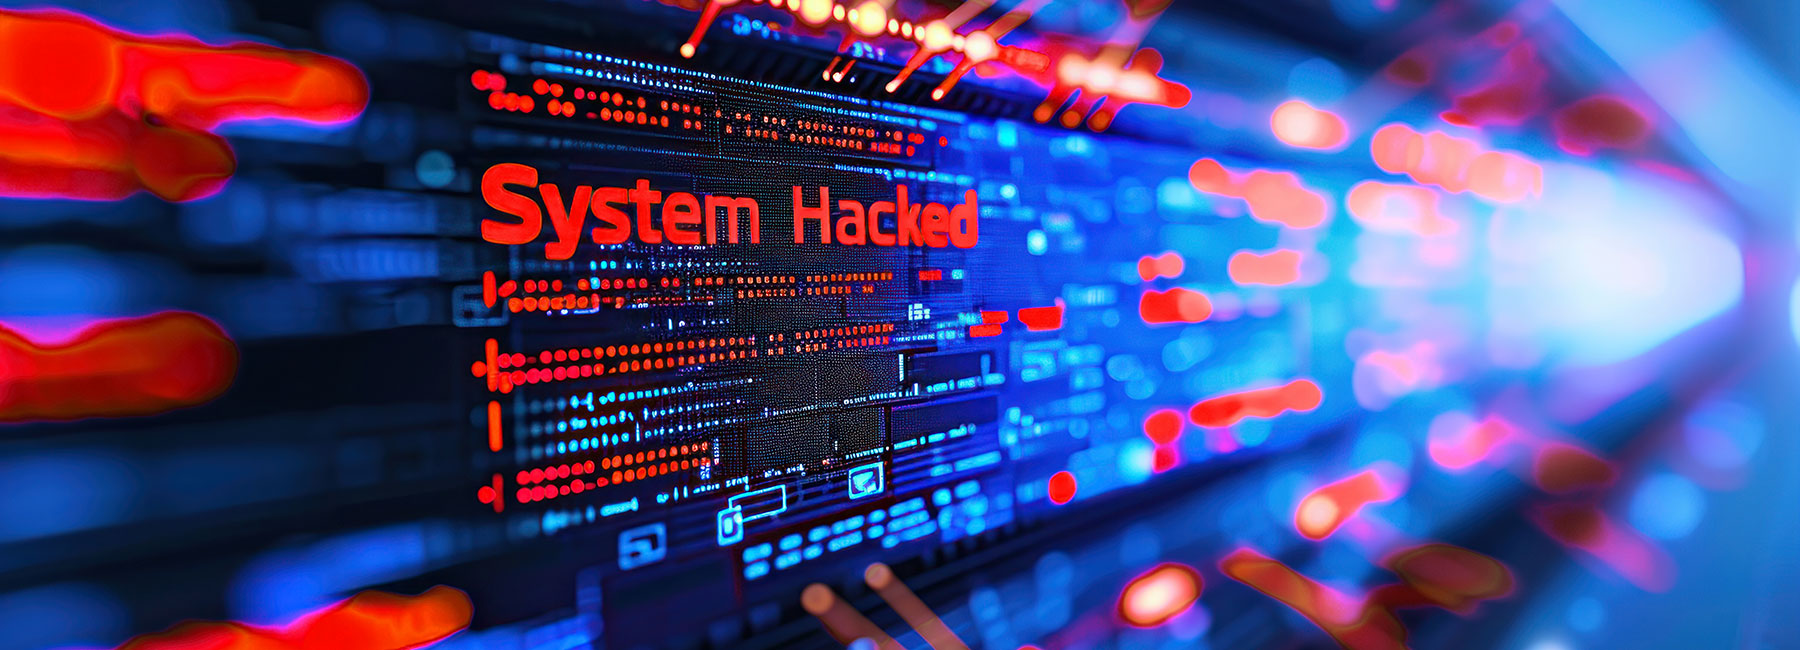 Abstract system hacked background